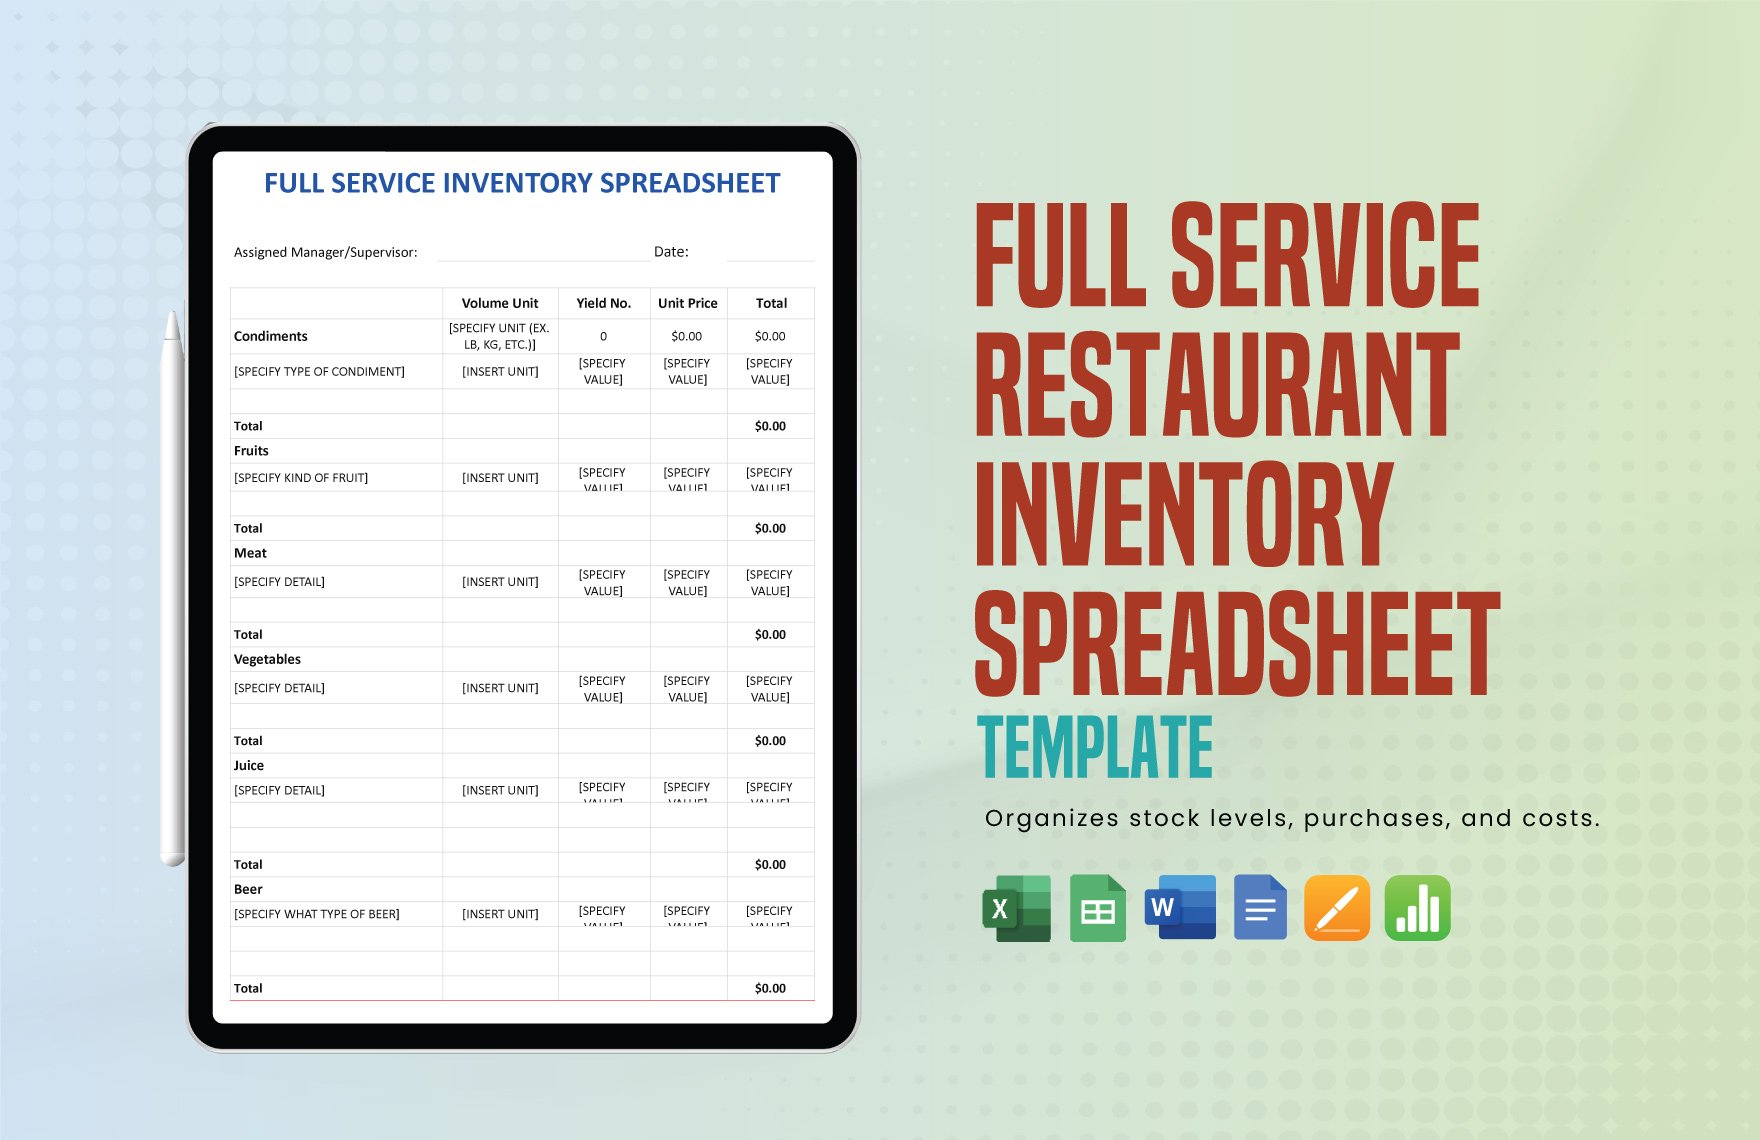 Full Service Restaurant Inventory Spreadsheet Template in Word, Google Docs, Excel, Google Sheets, Apple Pages, Apple Numbers